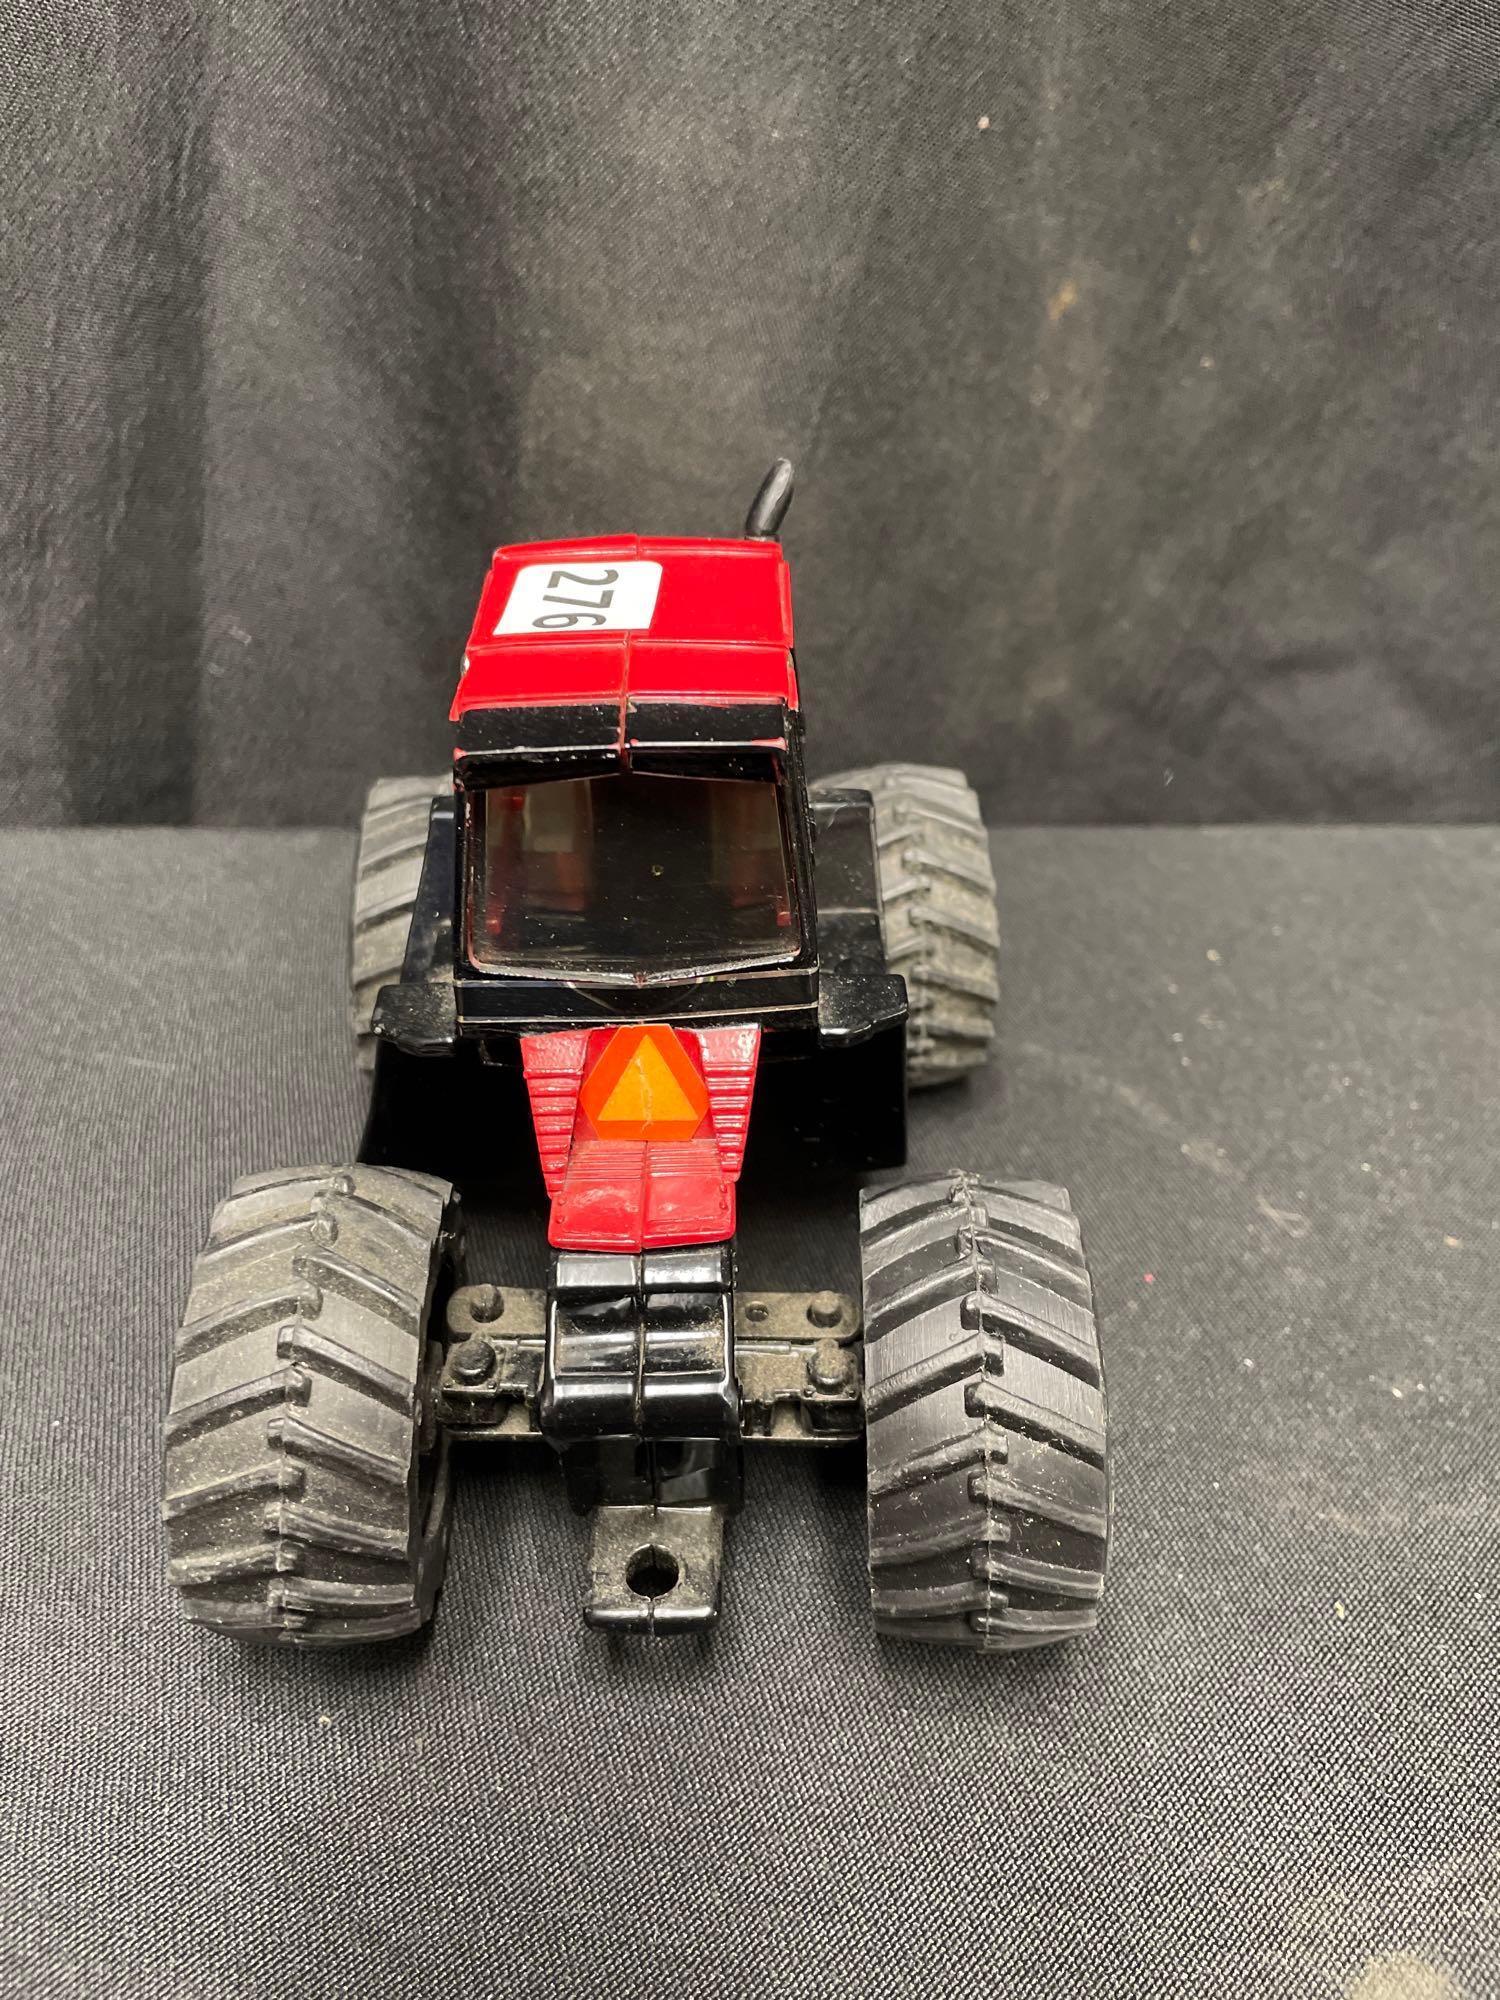 1/32nd Scale 1988 Ertl Case-IH 4894 4WD Tractor